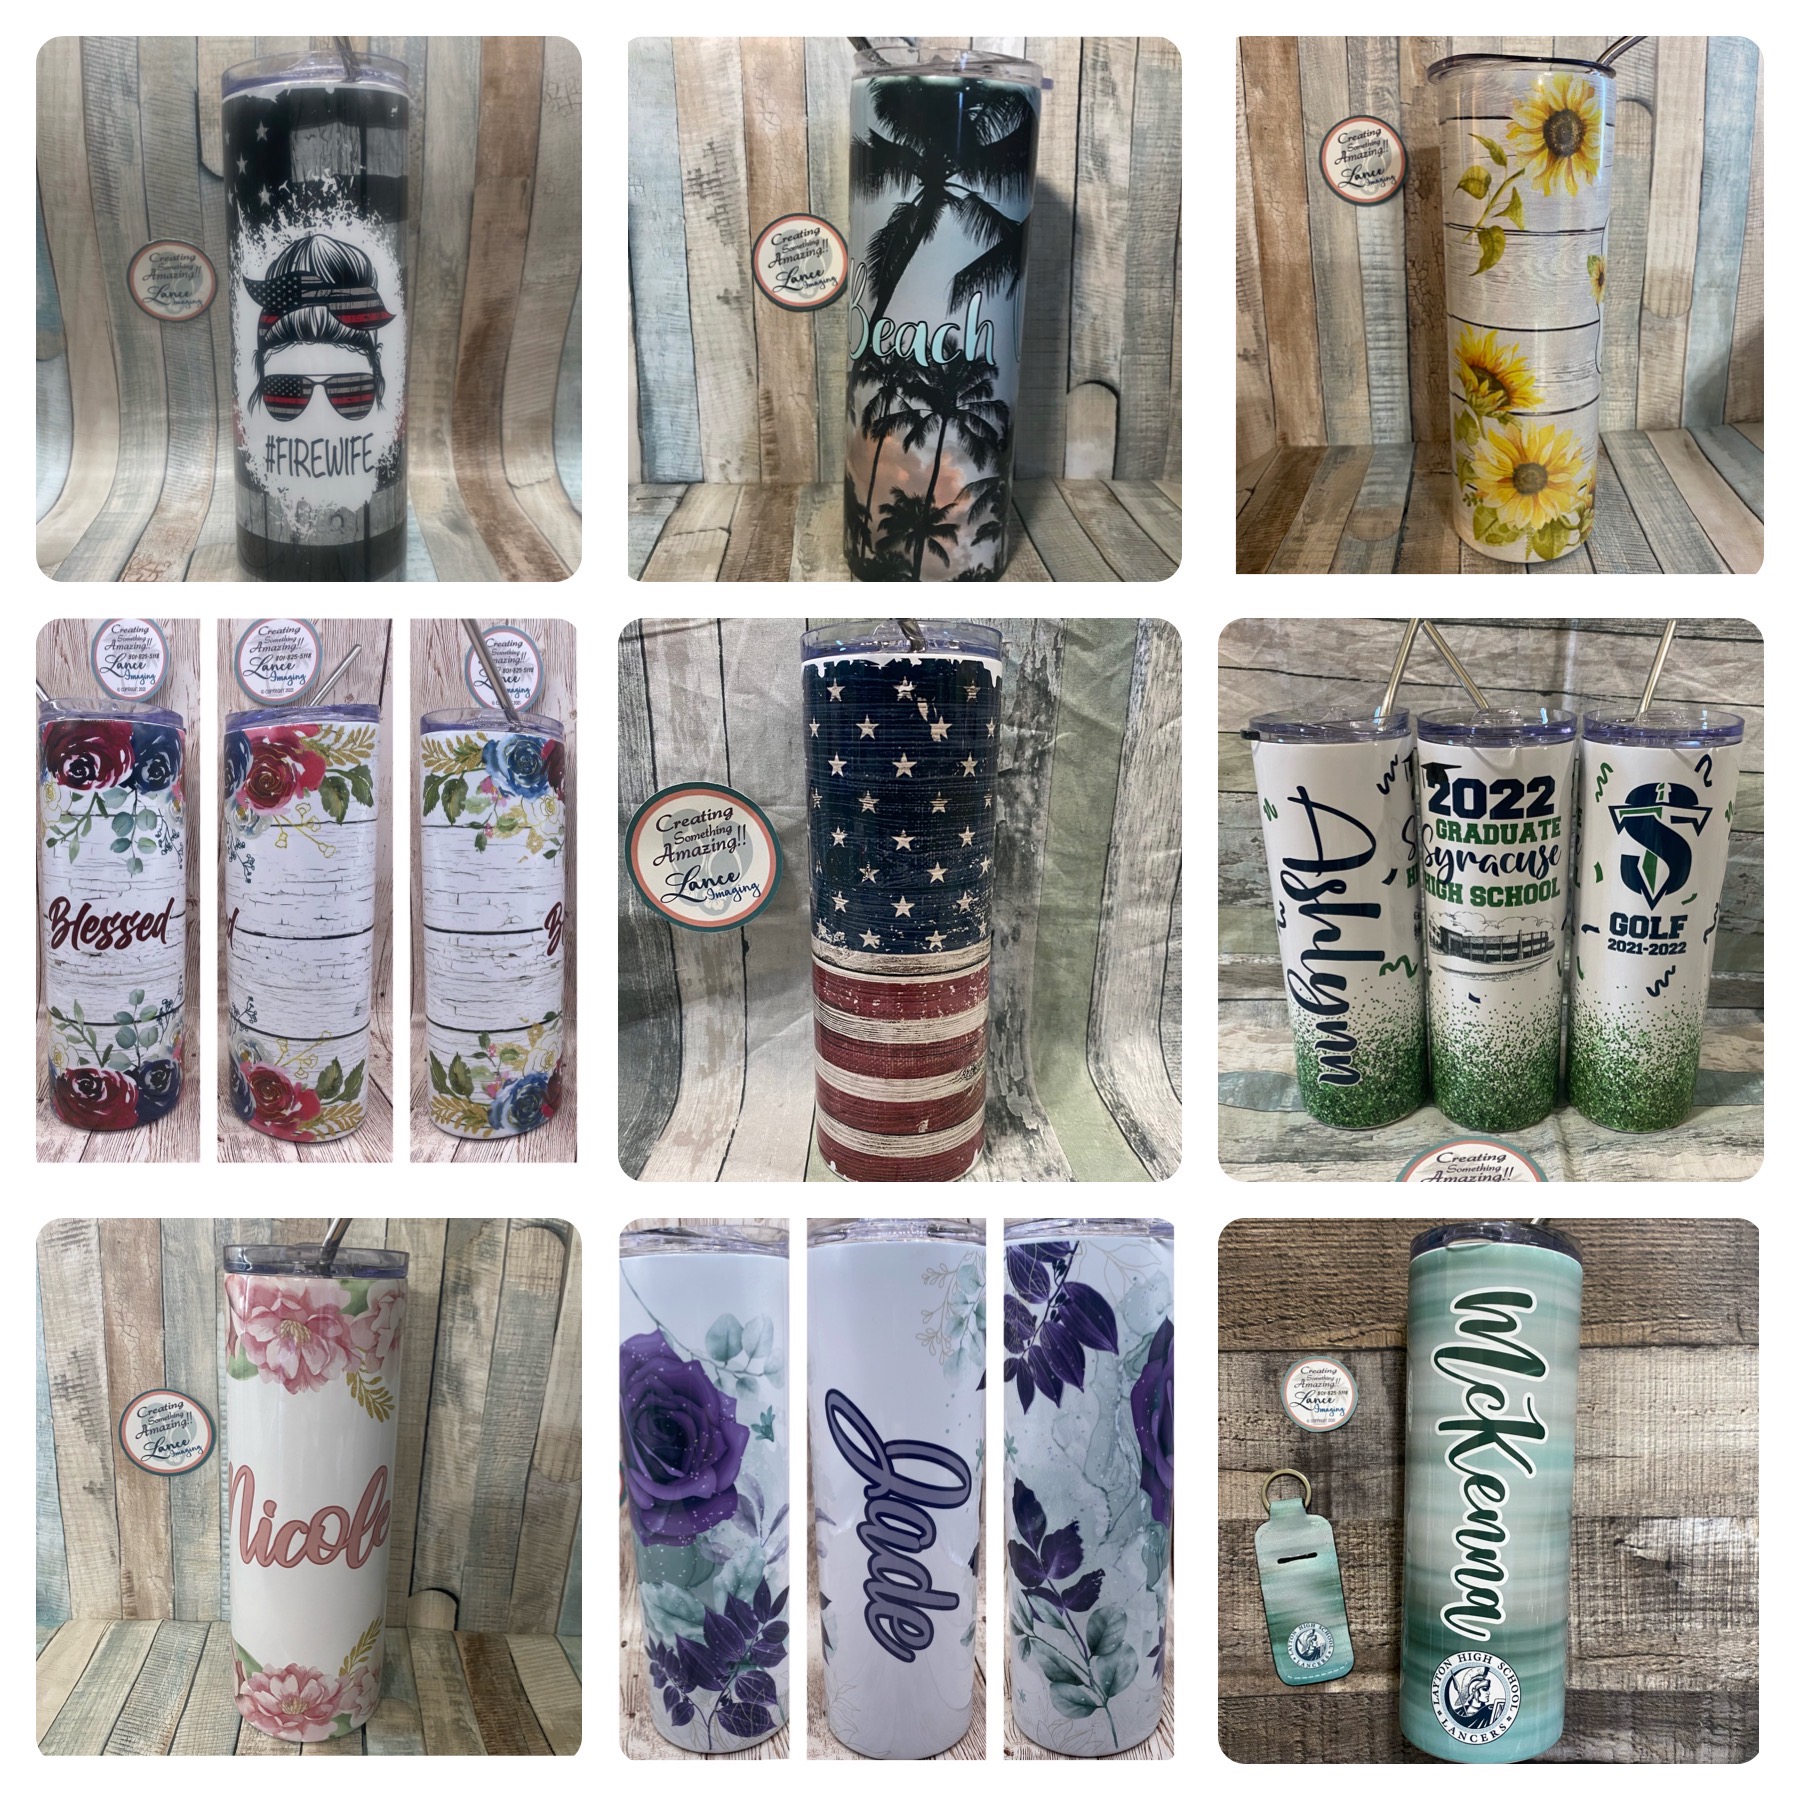 Some of my favorite cups made with sublimation printing